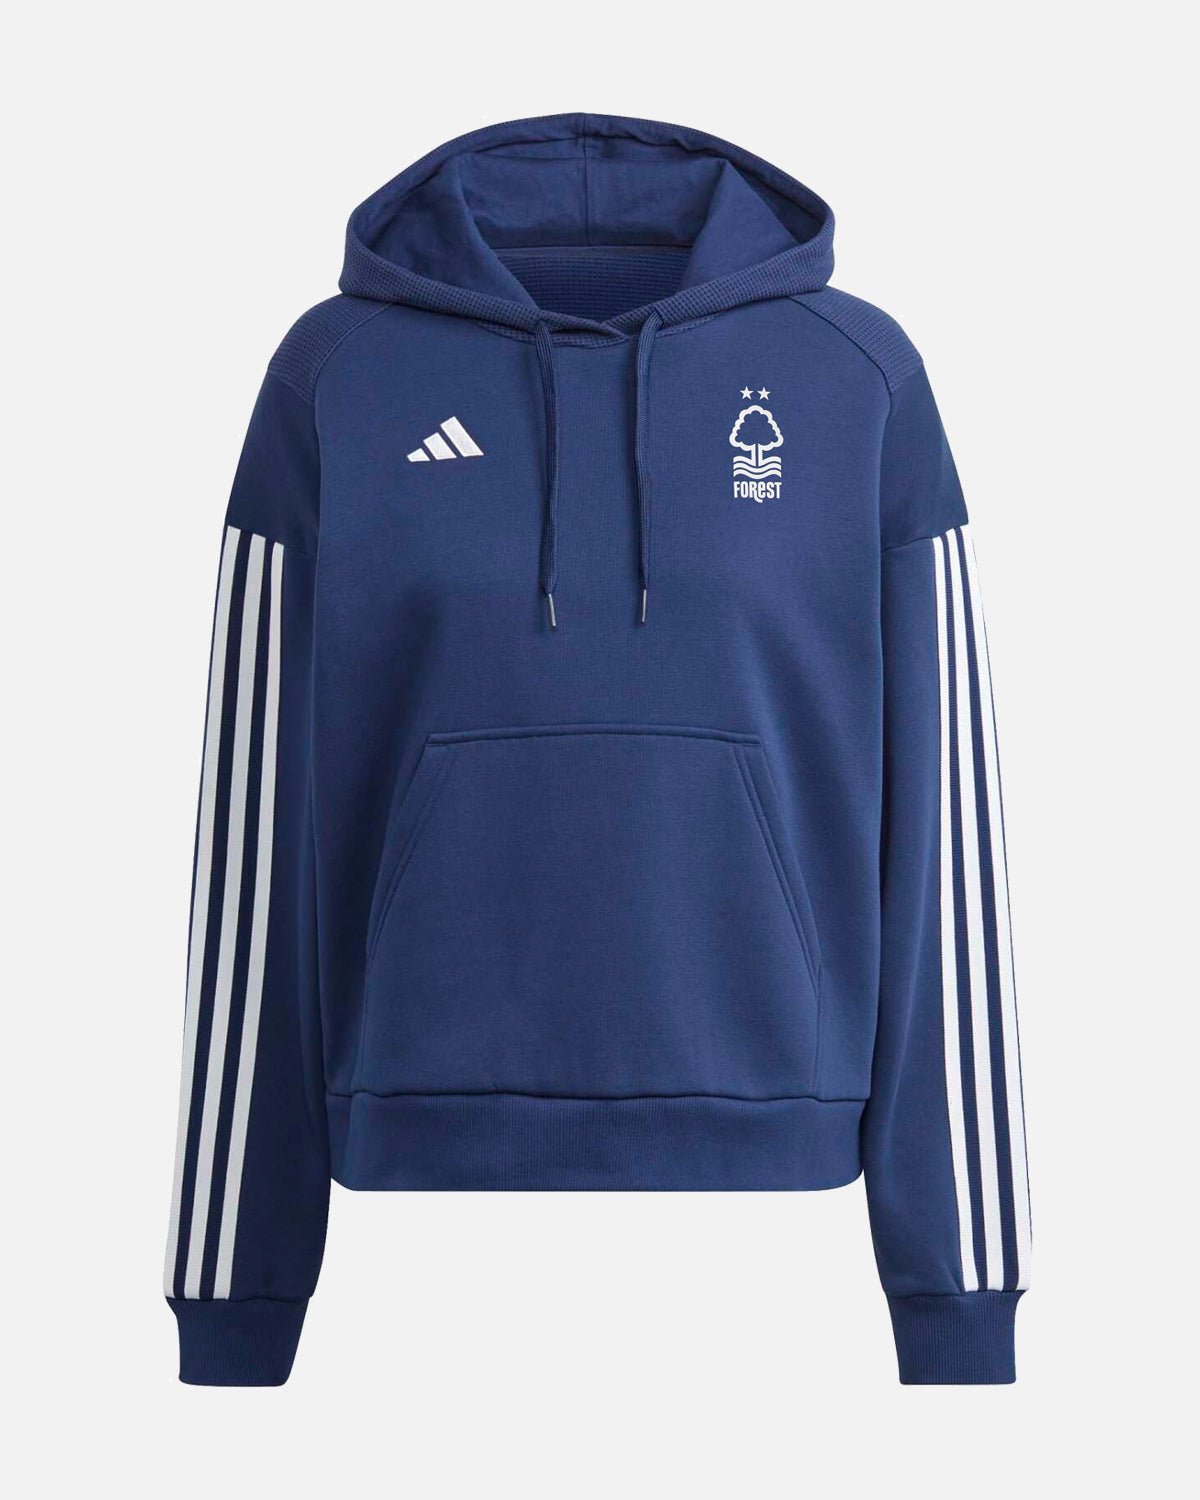 NFFC Women's Navy Travel Hoodie 23-24 - Nottingham Forest FC